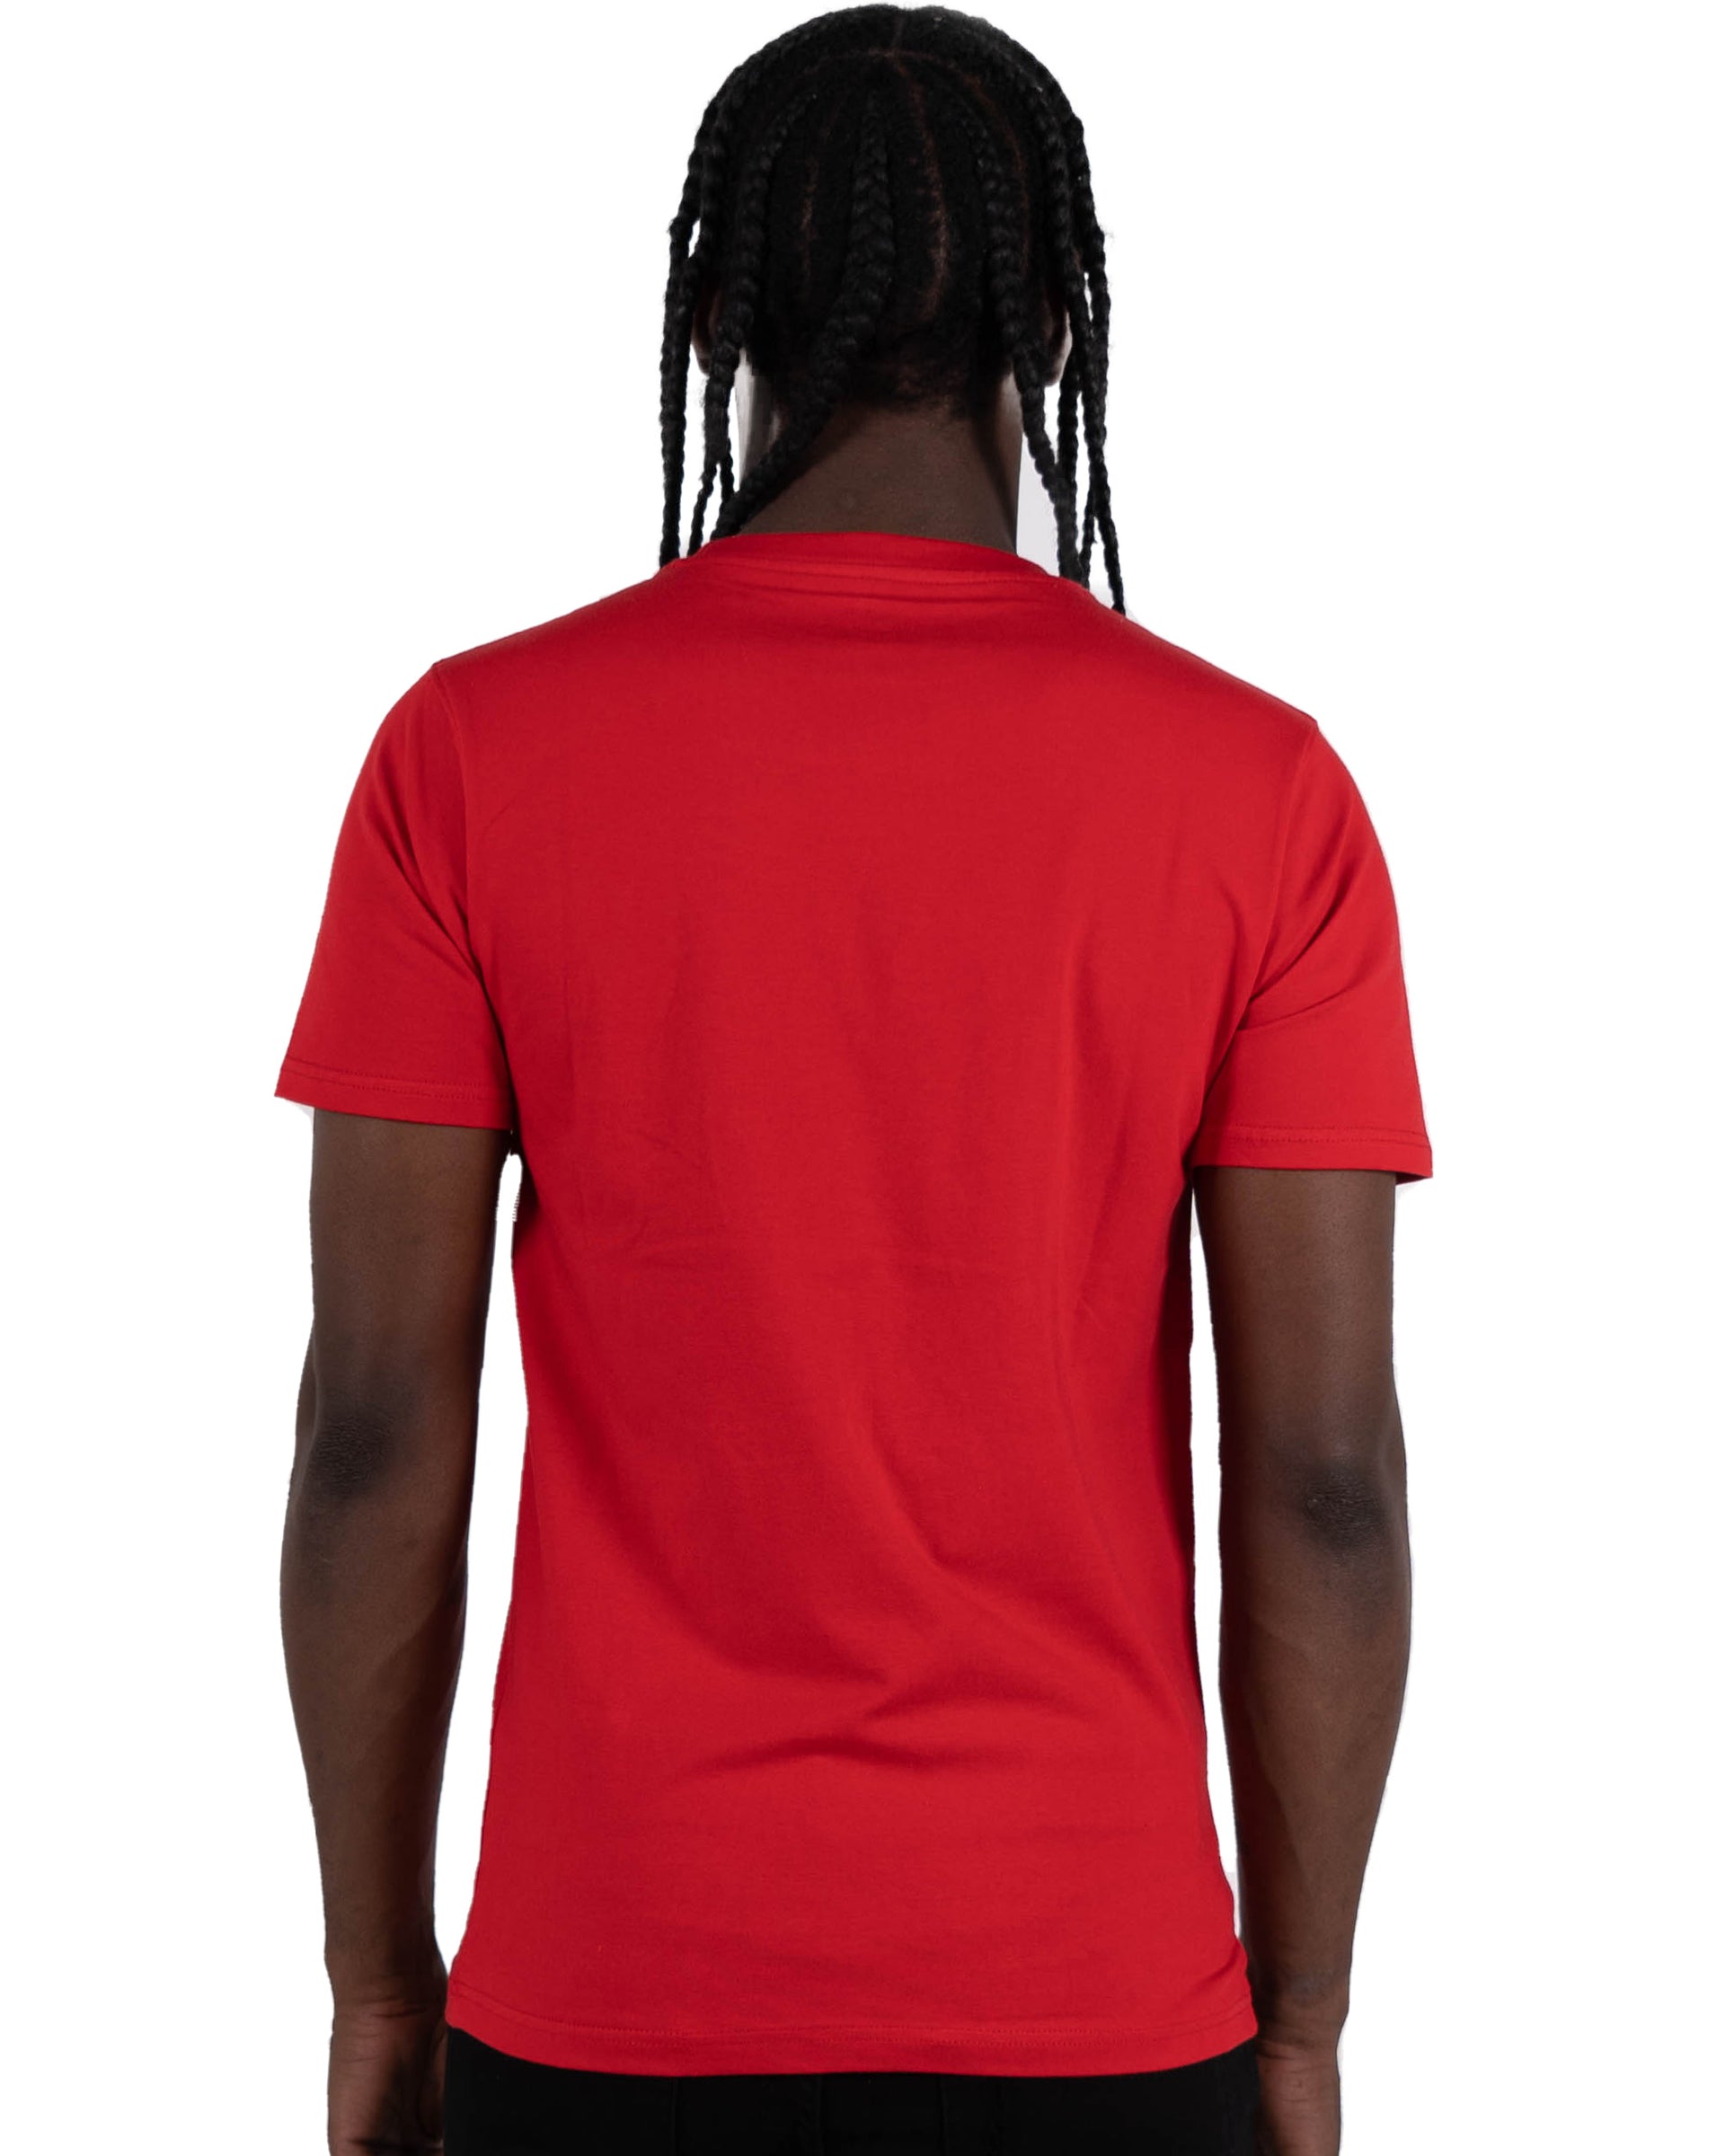 Men's "Trust No One" Embroidered Graphic T-Shirt | Red